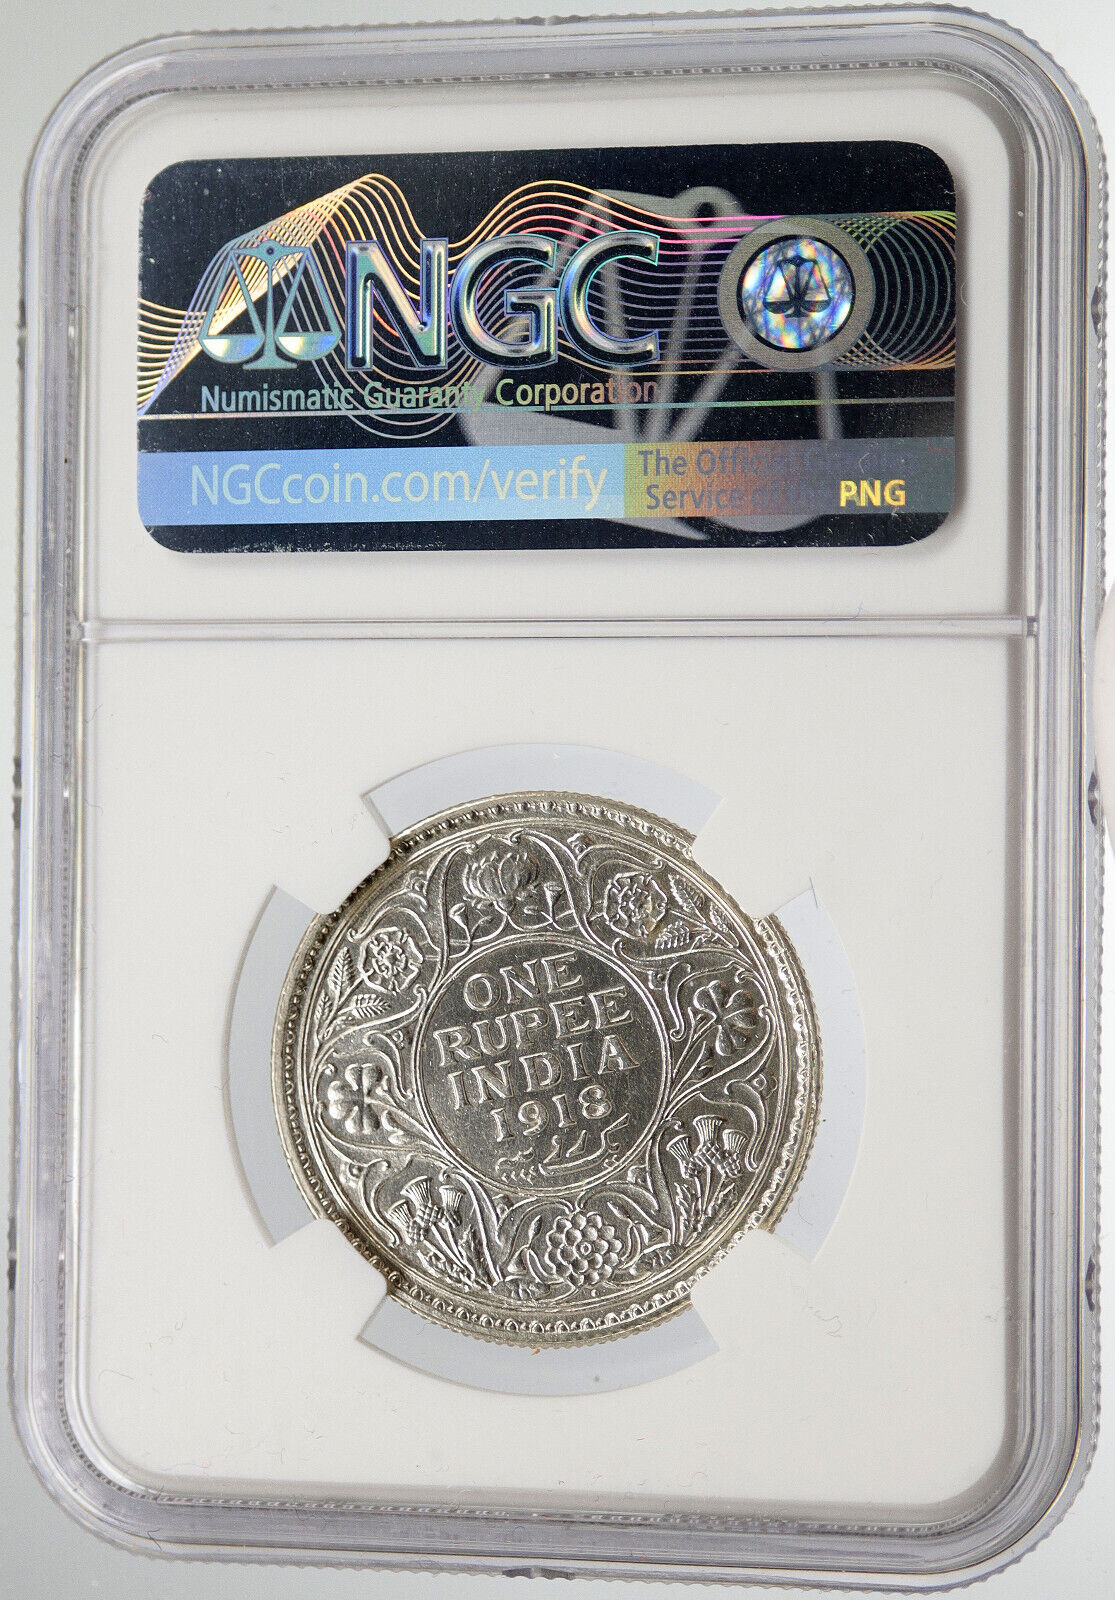 1918 INDIA Antique Silver RUPEE UK King George V Indian Coin NGC i119720